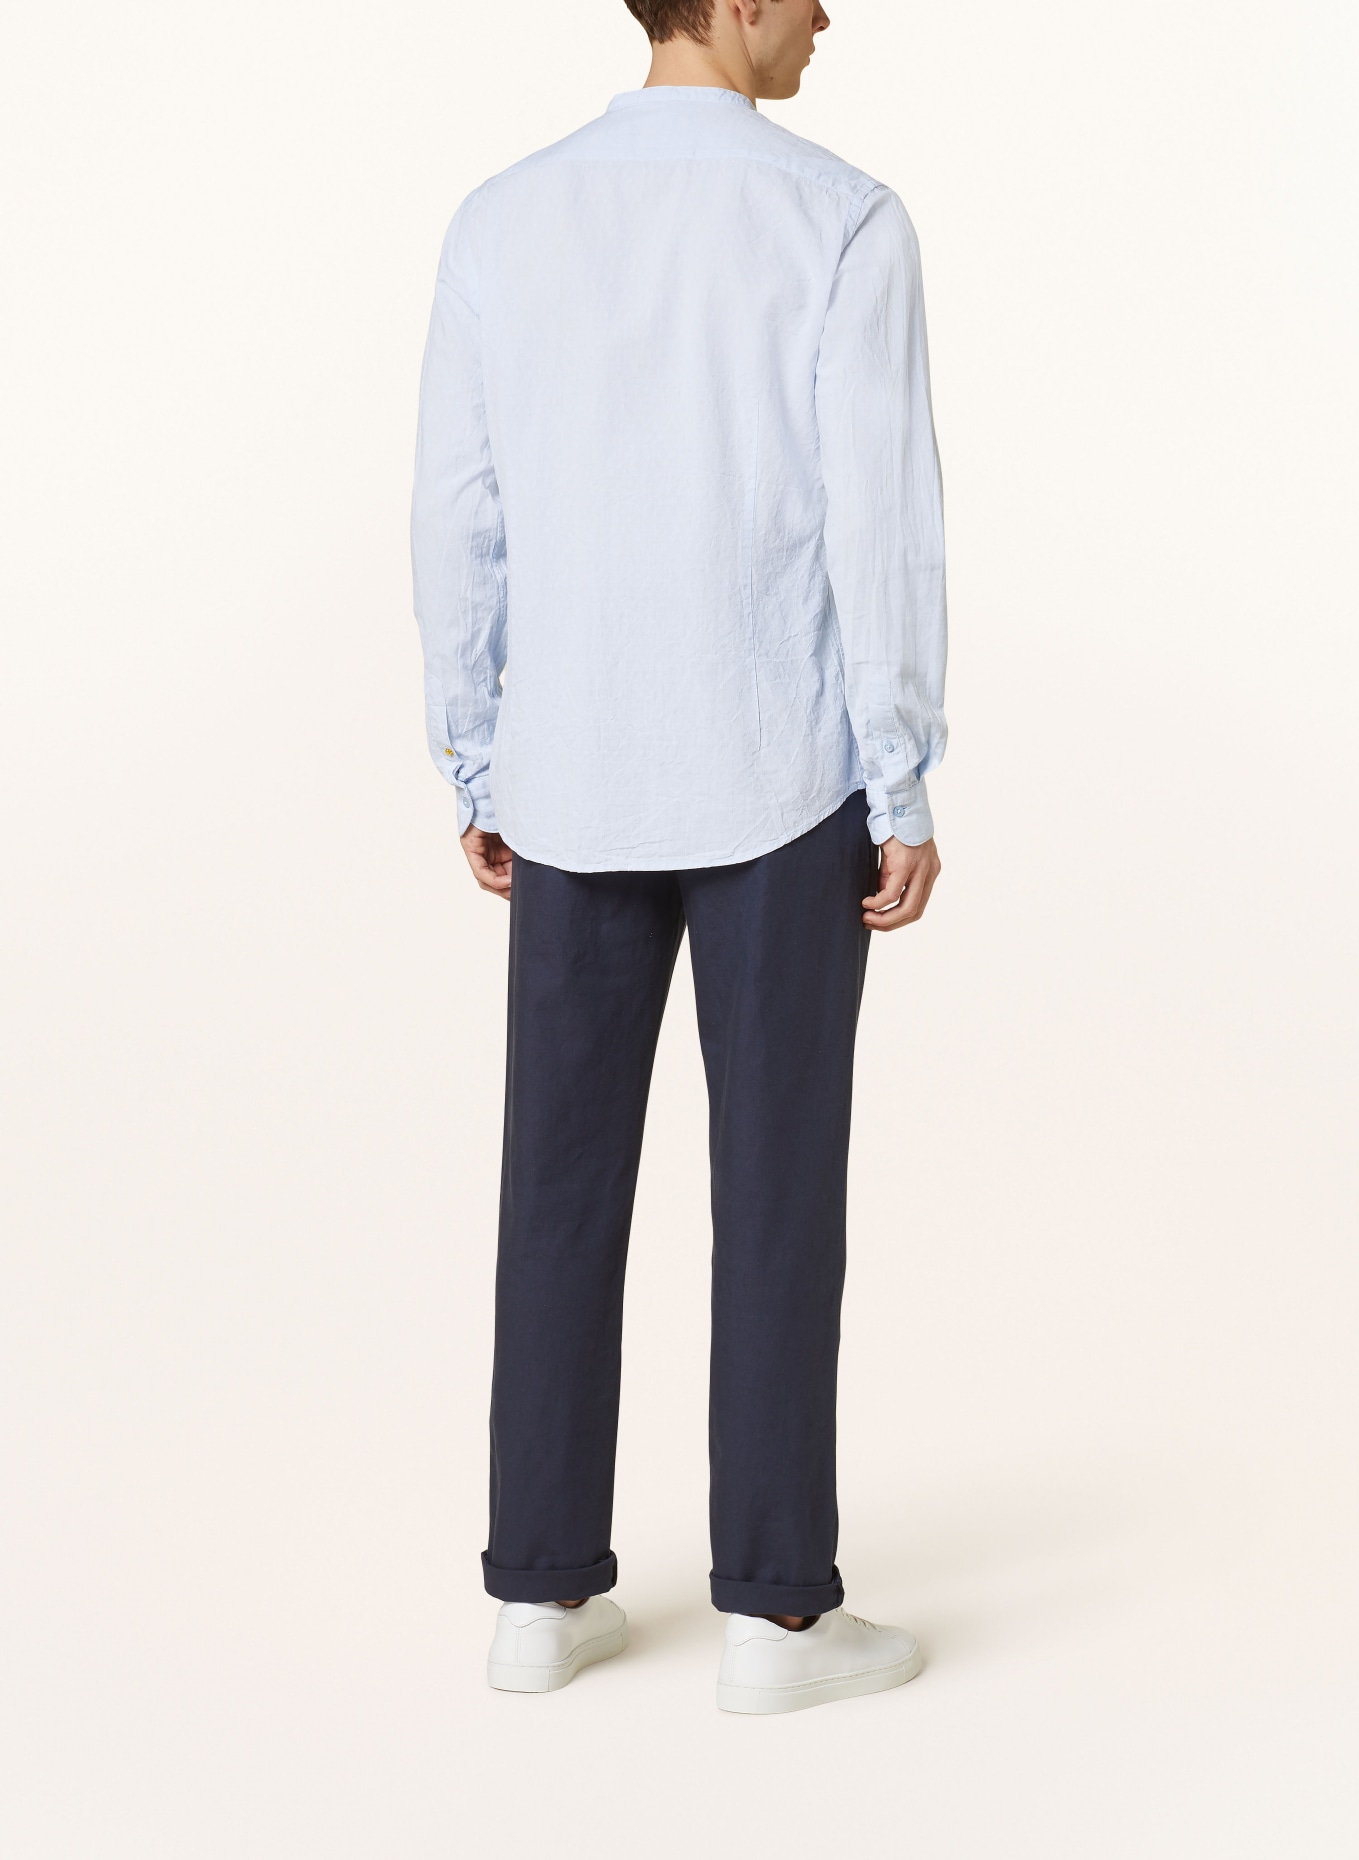 Q1 Manufaktur Shirt slim relaxed fit with stand-up collar and linen, Color: LIGHT BLUE (Image 3)